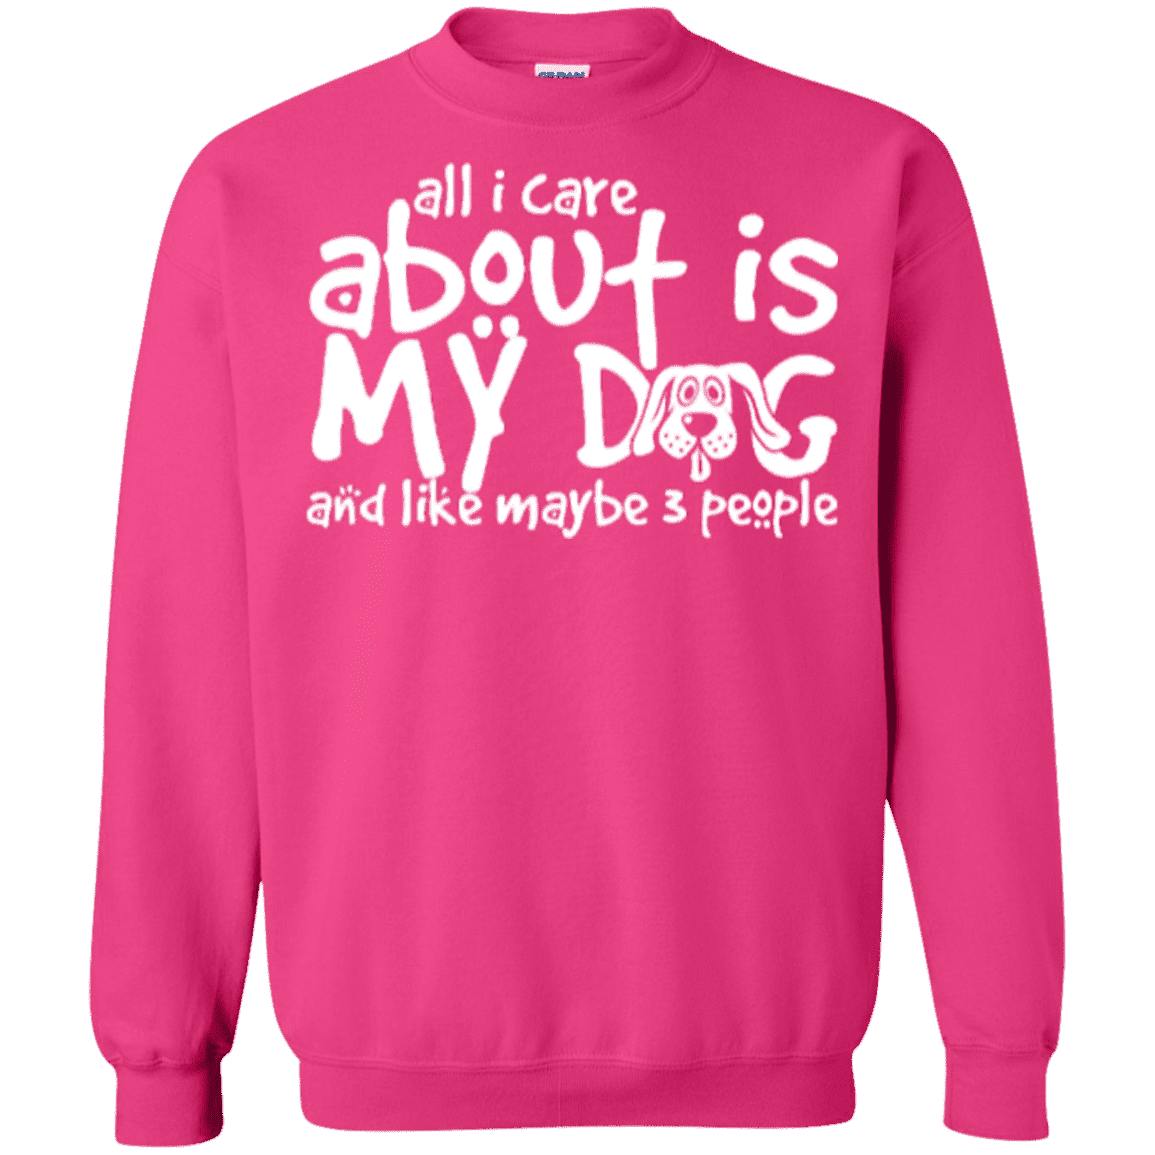 All I Care About Is My Dog - Sweatshirt.